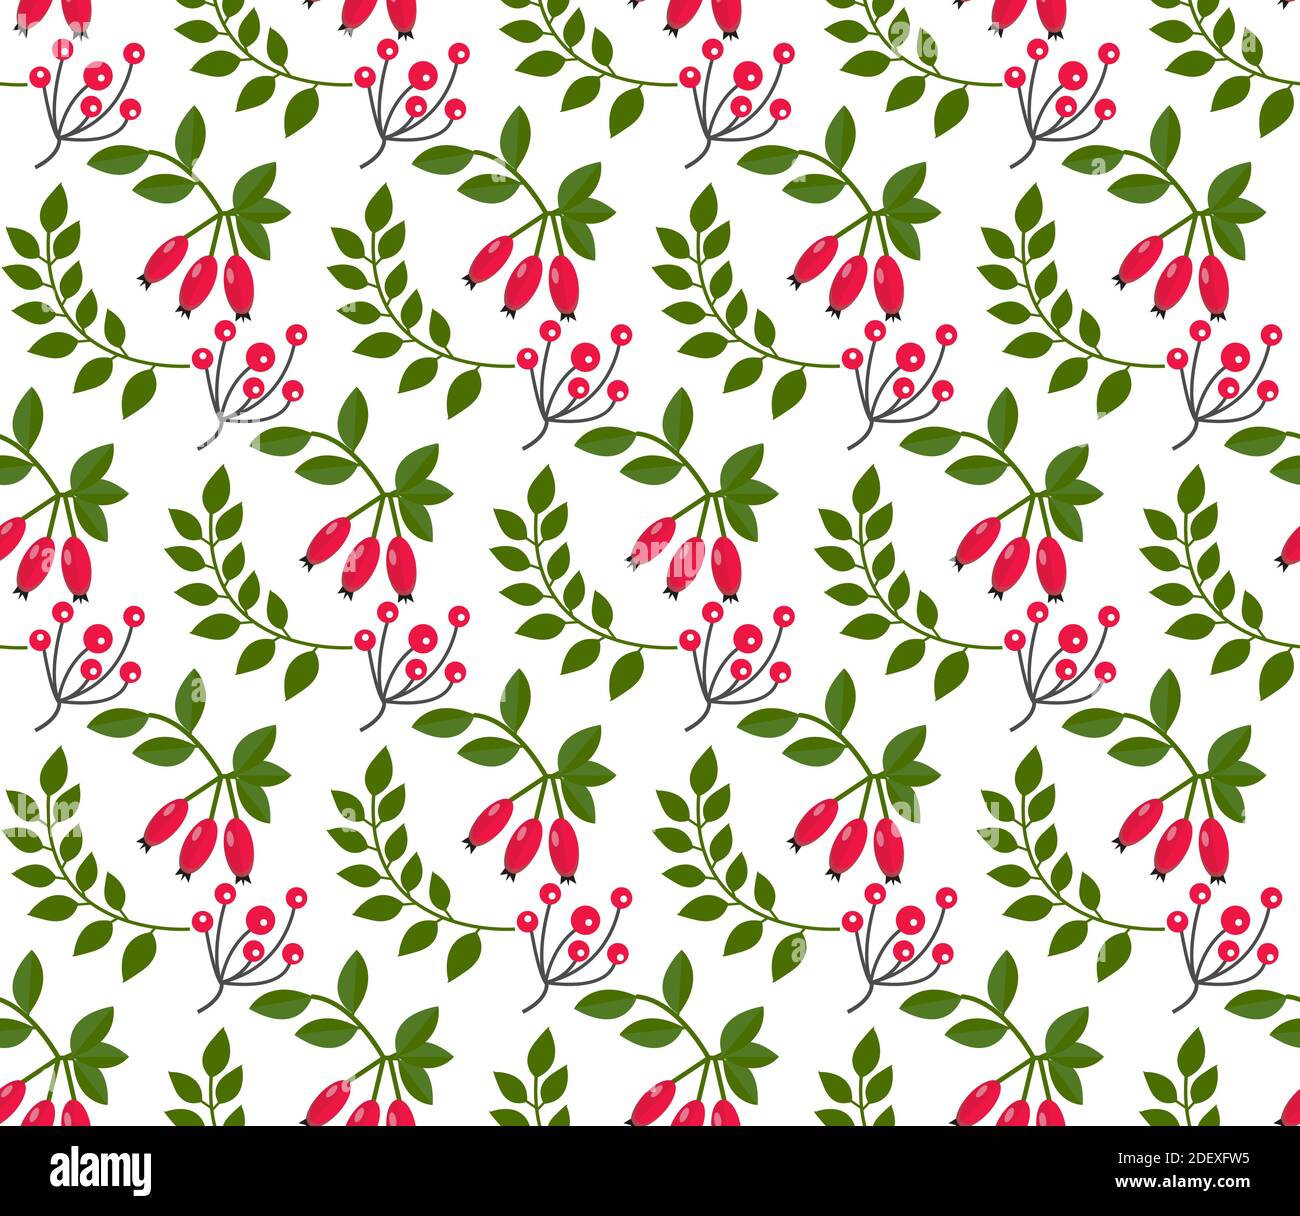 Christmas plants seamless pattern. Merry christmas repeating texture winter flowers.Tileable Holiday background. Vecto illustration Stock Vector